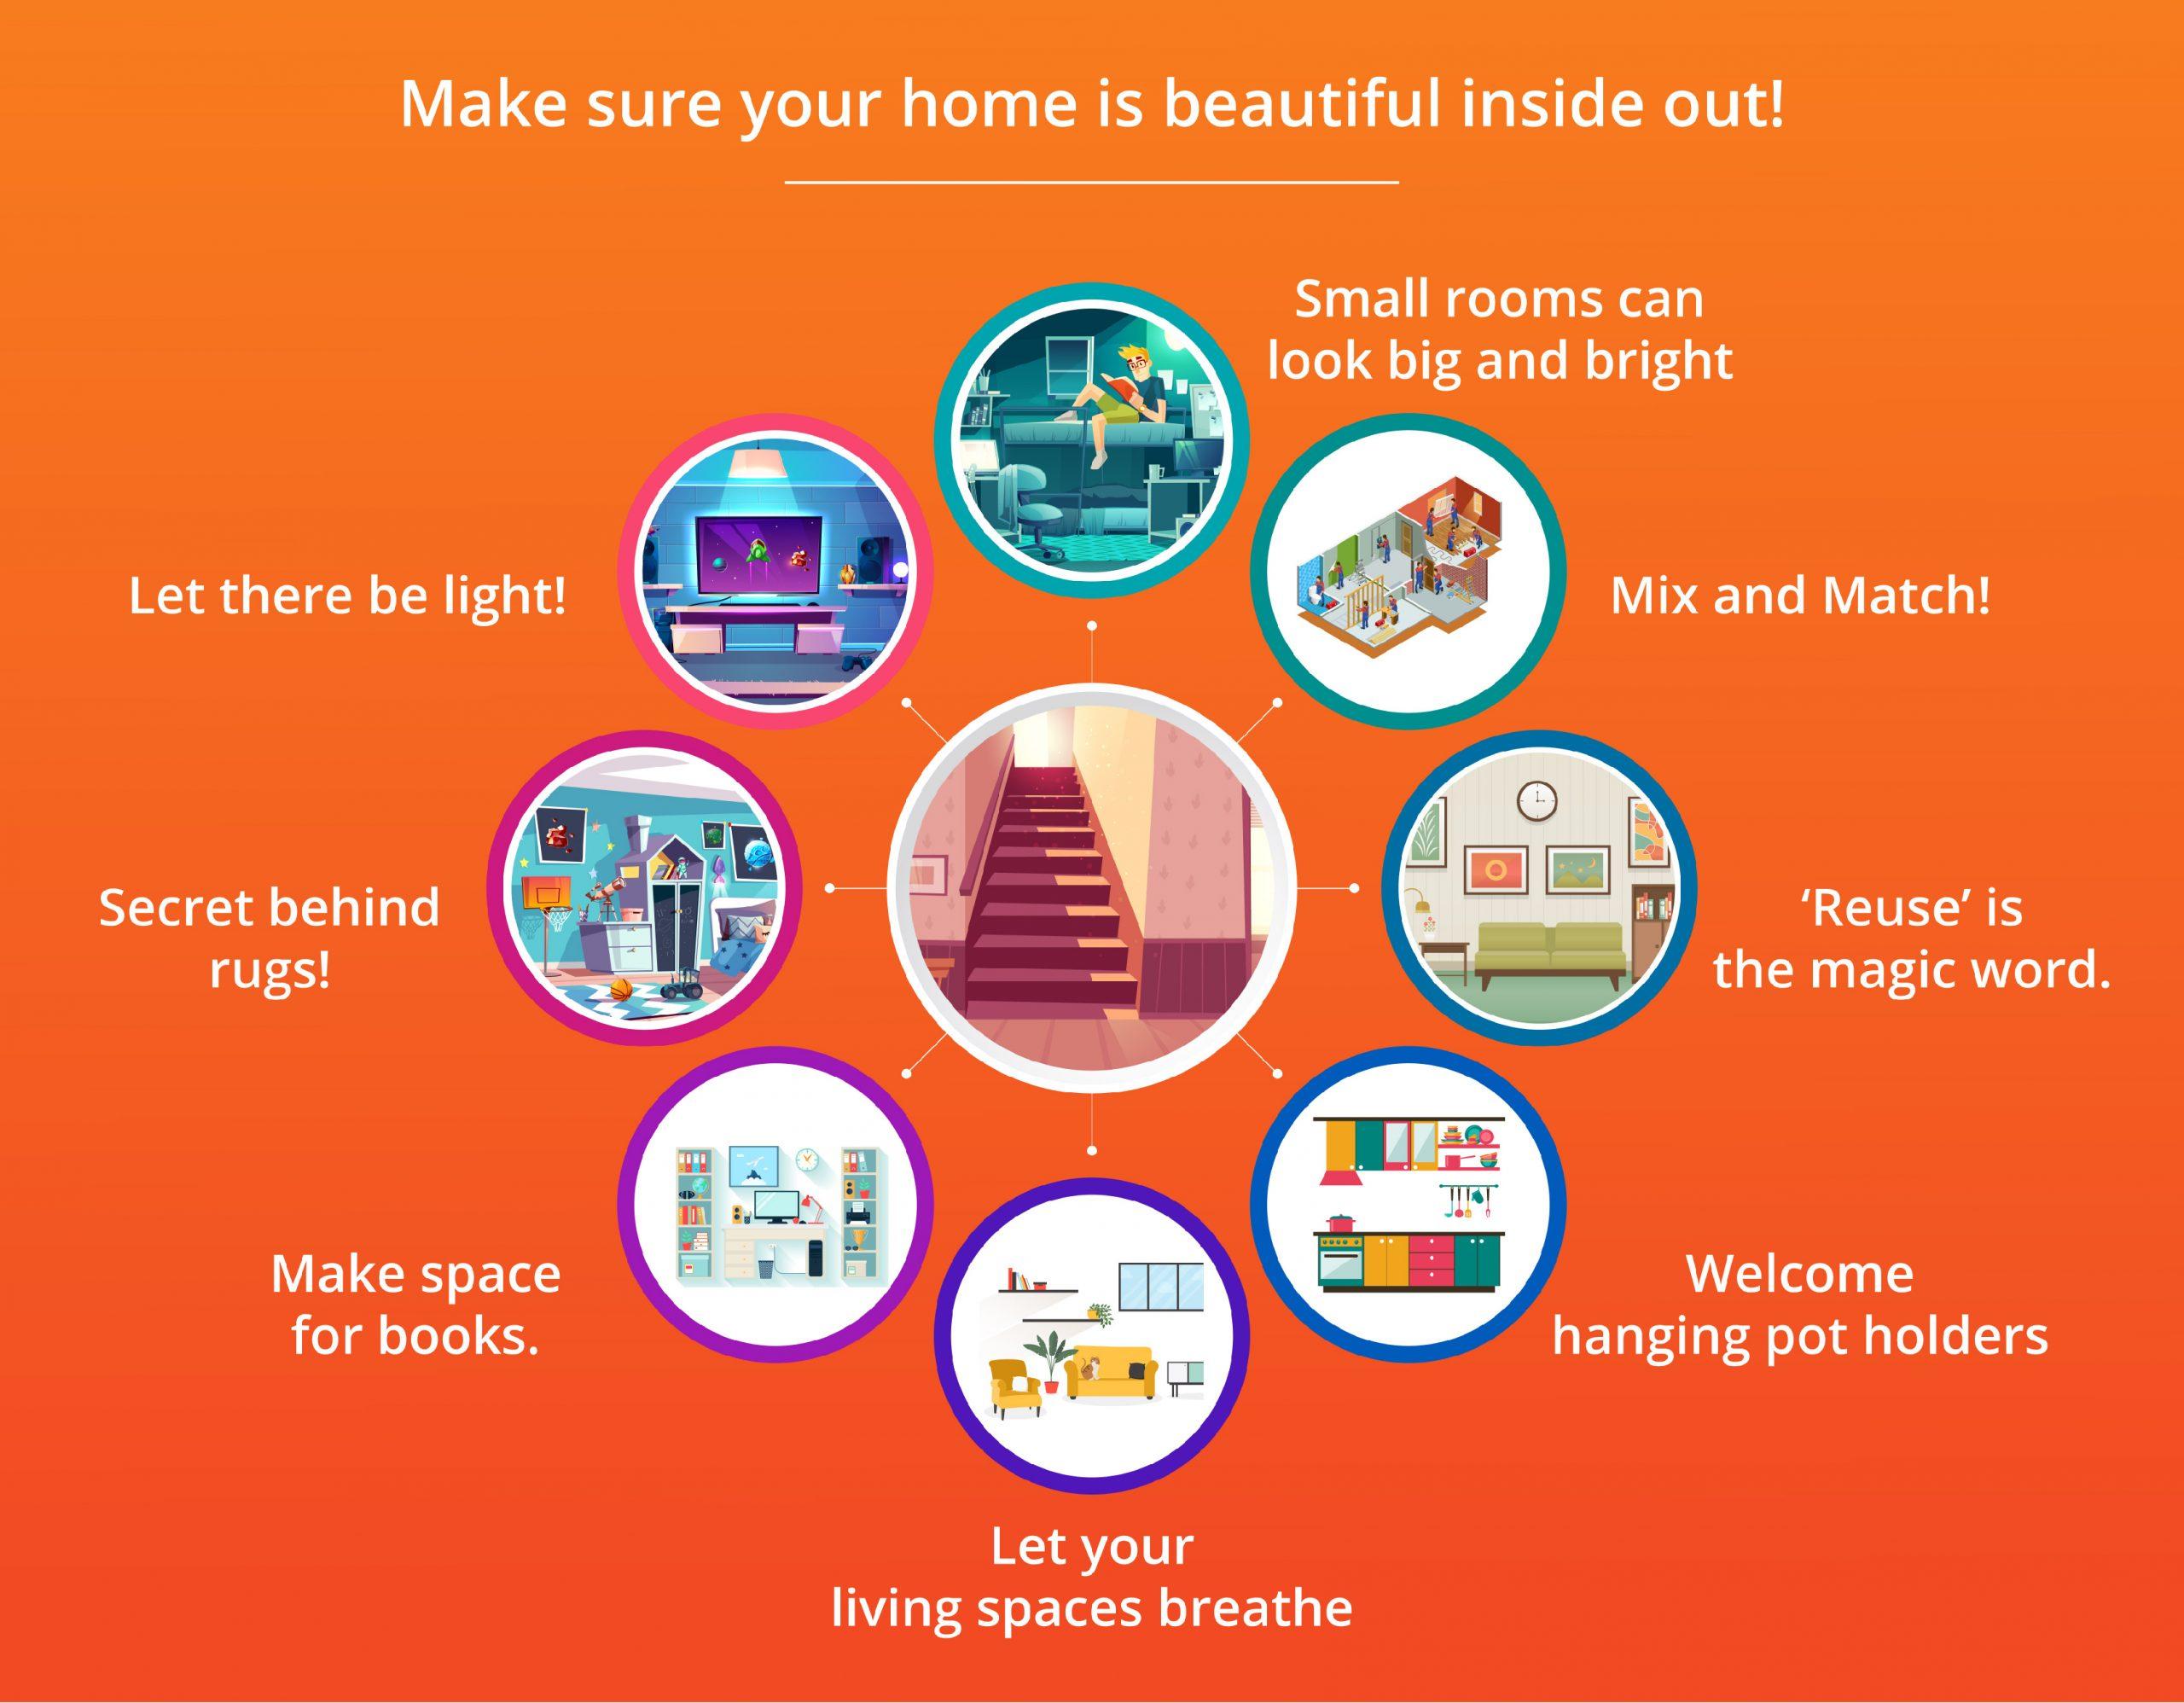 Make sure your home is beautiful inside out!